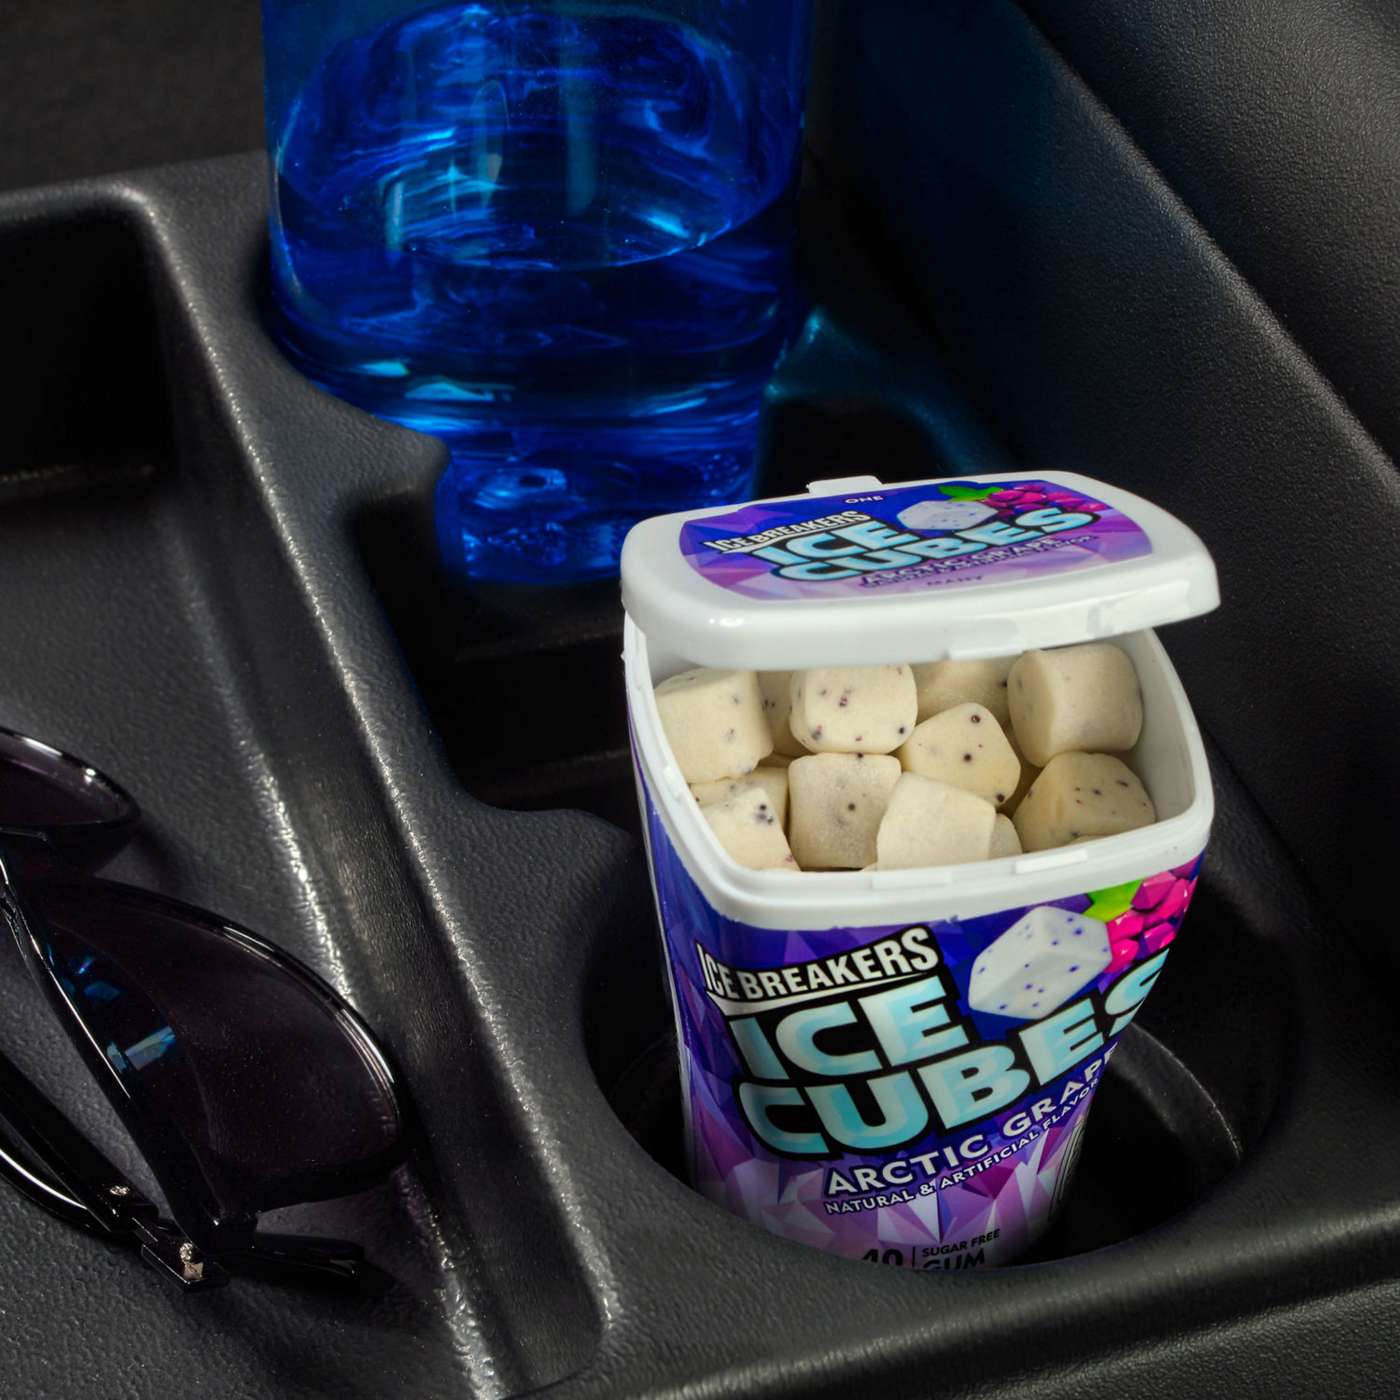 Ice Breakers Ice Cubes Arctic Grape Sugar Free Chewing Gum; image 5 of 7